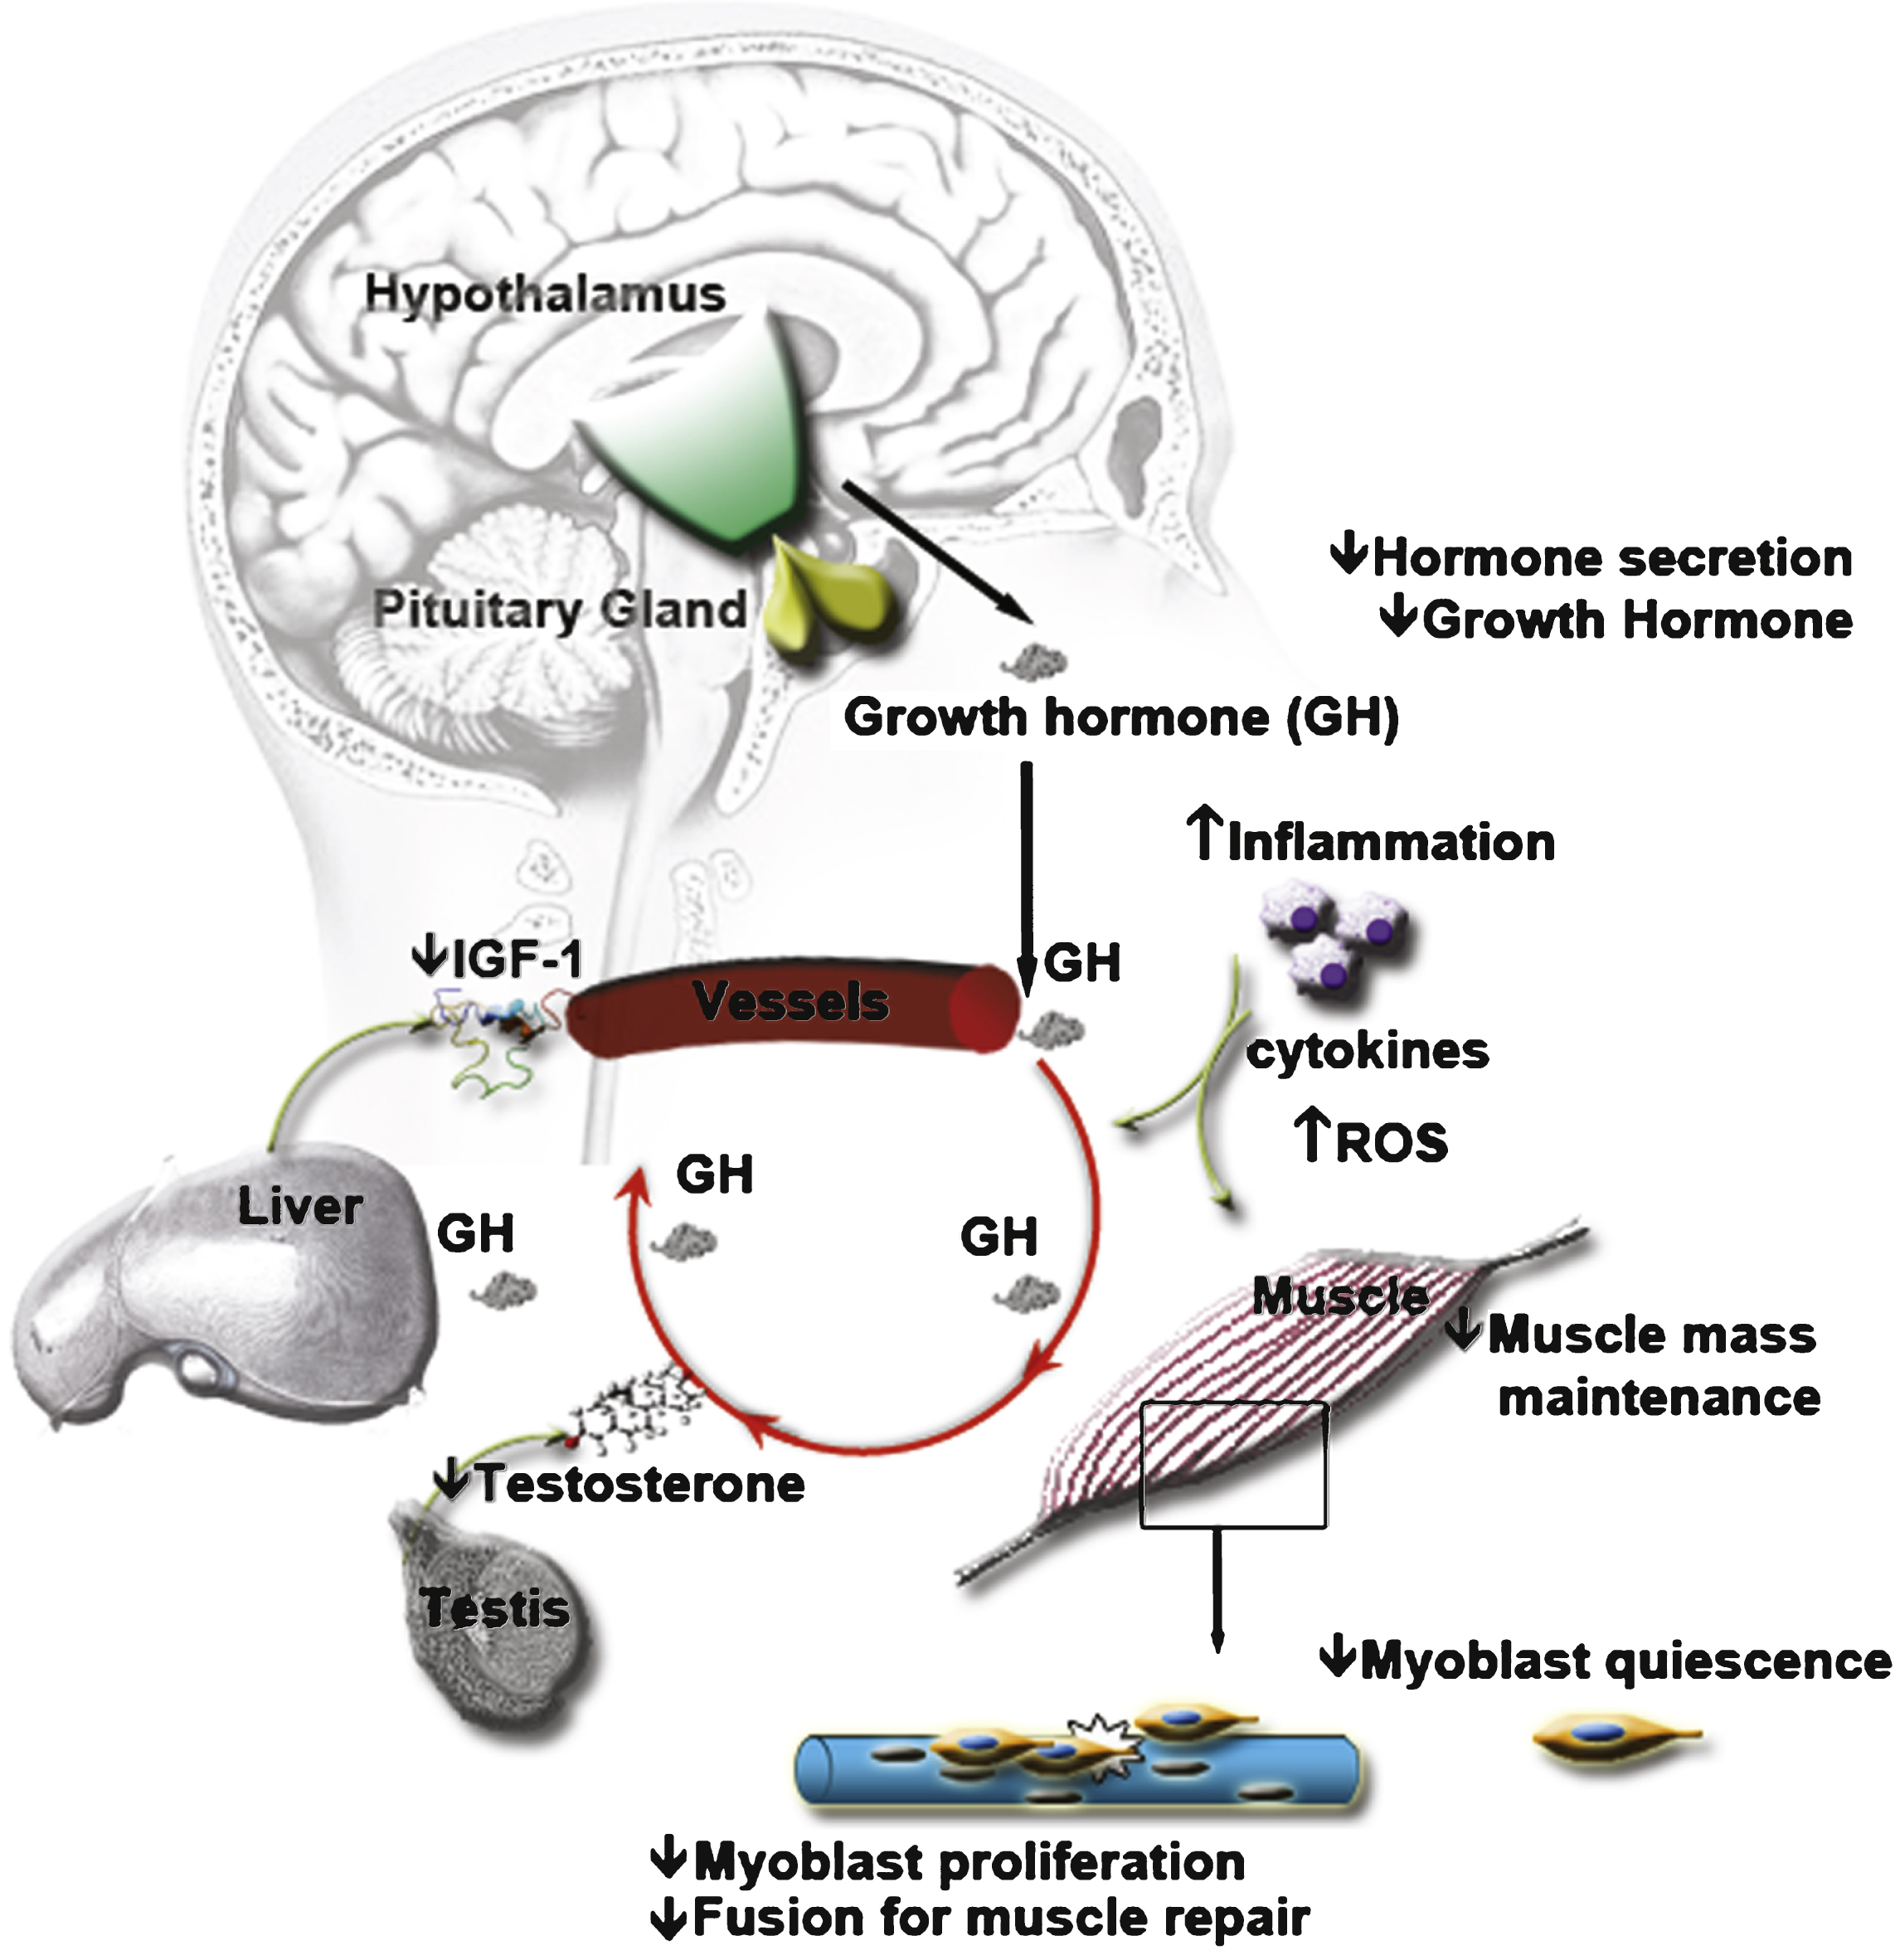 Age alters serum composition and thereby affects intercellular communication at distance. The endocrine hypothalamic-pituitary axis is altered with aging, affecting the composition of circulating hormones in the serum. For instance, the secretion of growth hormone is decreased, leading to loss of muscle mass. In addition, the lower level of growth hormone will also stimulate less the secretion of IGF-1 - IGF-1 being involved in muscle mass maintenance and in the satellite cell myogenic program. The endocrine hypothalamic-gonadotropic axis is also affected, leading to a decrease of sex steroids such as Testosterone, another hormone involved in muscle mass maintenance. Similarly, a decrease in oestrogen can act on the myogenic program through IGF-1 signaling. The decrease in circulating hormones affects the capacity of the satellite cells to respond to muscle damage. Aging is also associated with an increase in inflammation. The cytokines secretion by aged inflammatory cells as well as their ROS production is modified and can also affect the capacity of the satellite cells to respond to muscle damage. The modification of the entire serum composition with aging has negative effects on muscle mass and on muscle regeneration capacity.